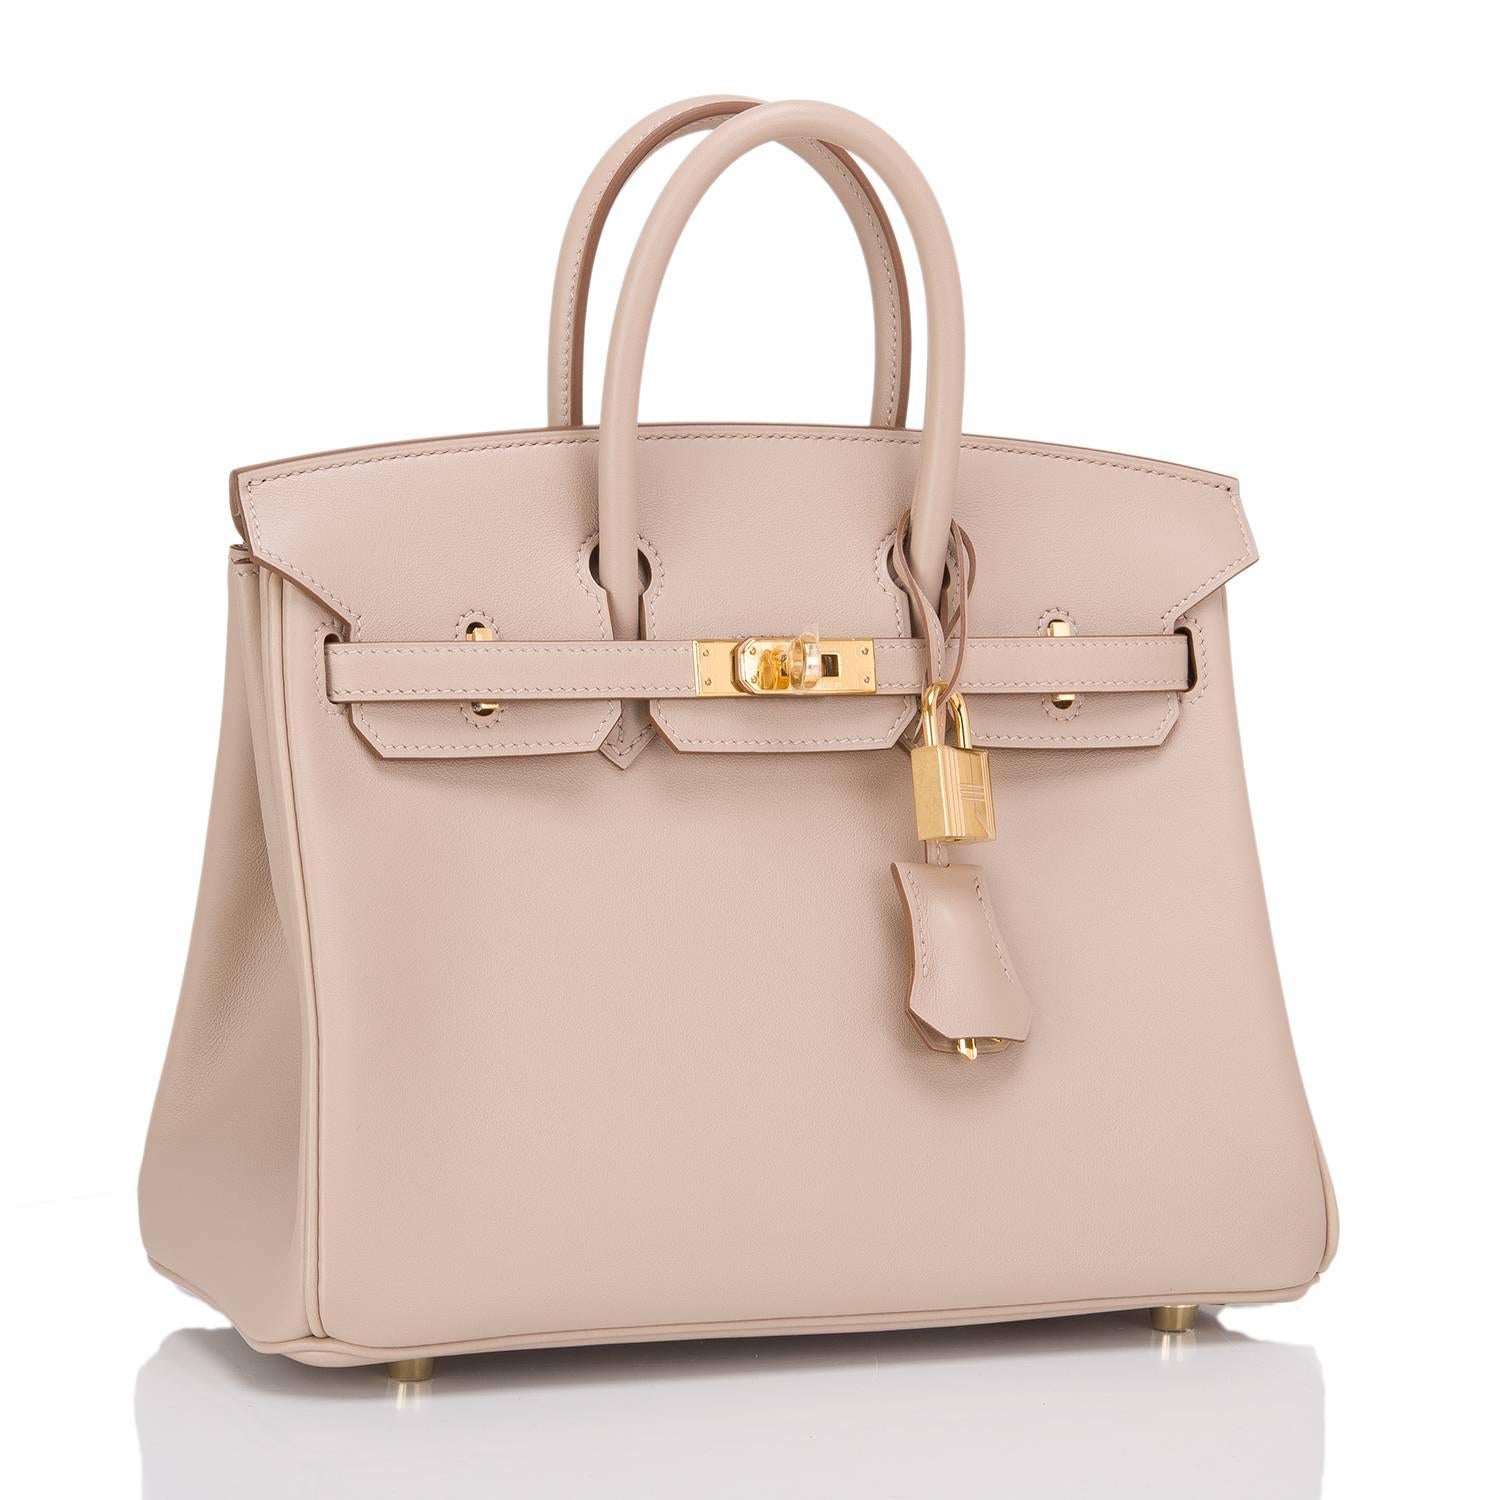 Hermes Argile Birkin 25cm in swift leather with gold hardware.

This style features tonal stitching, front toggle closure, clochette with lock and two keys, and double rolled handles.

The interior is lined in Argile chevre with one zip pocket